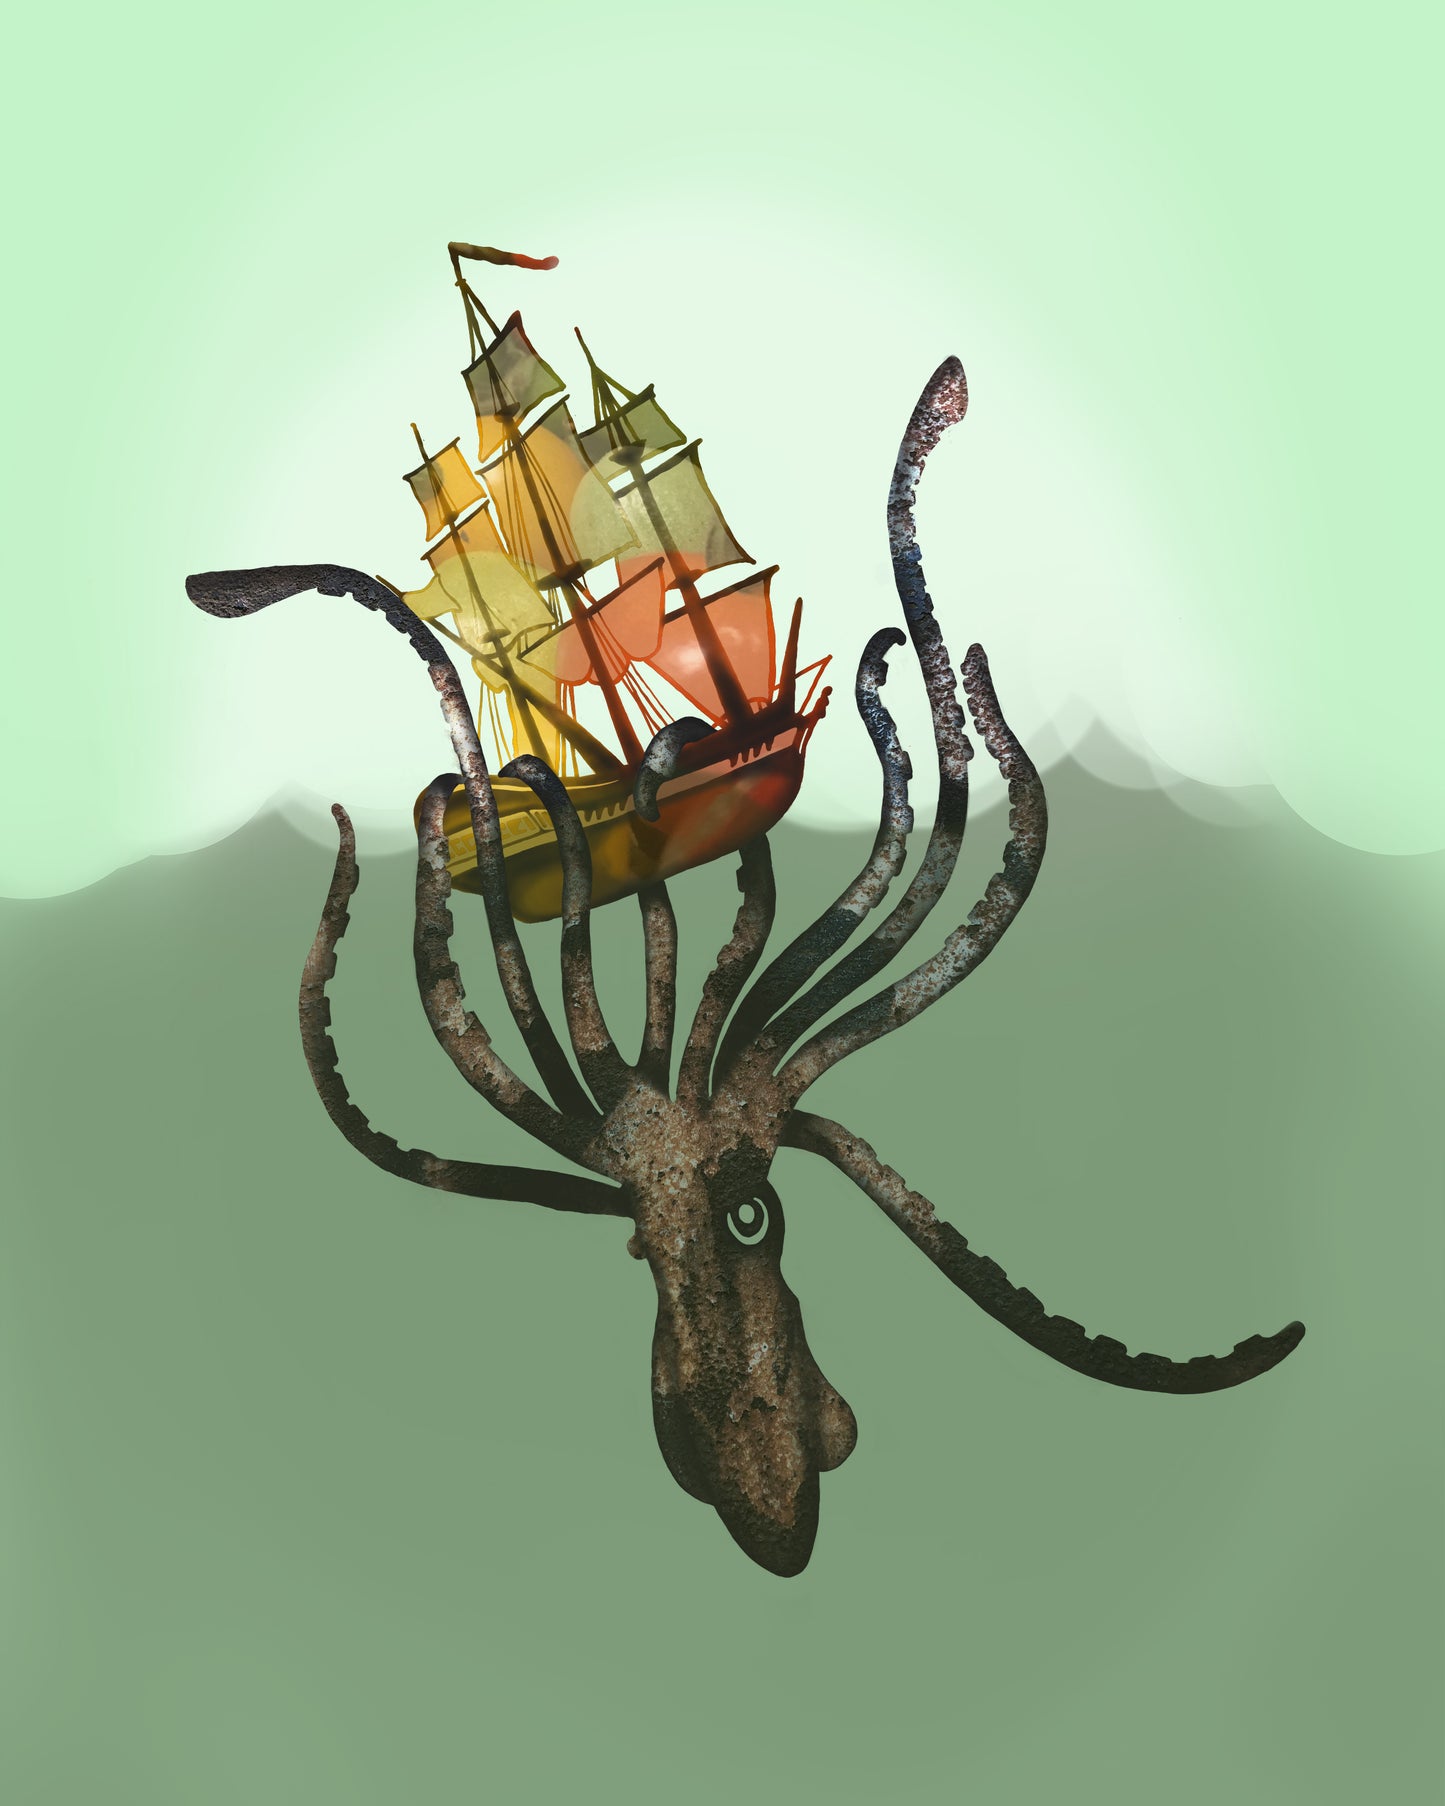 Giant Squid Attacks Boat - Green Waters